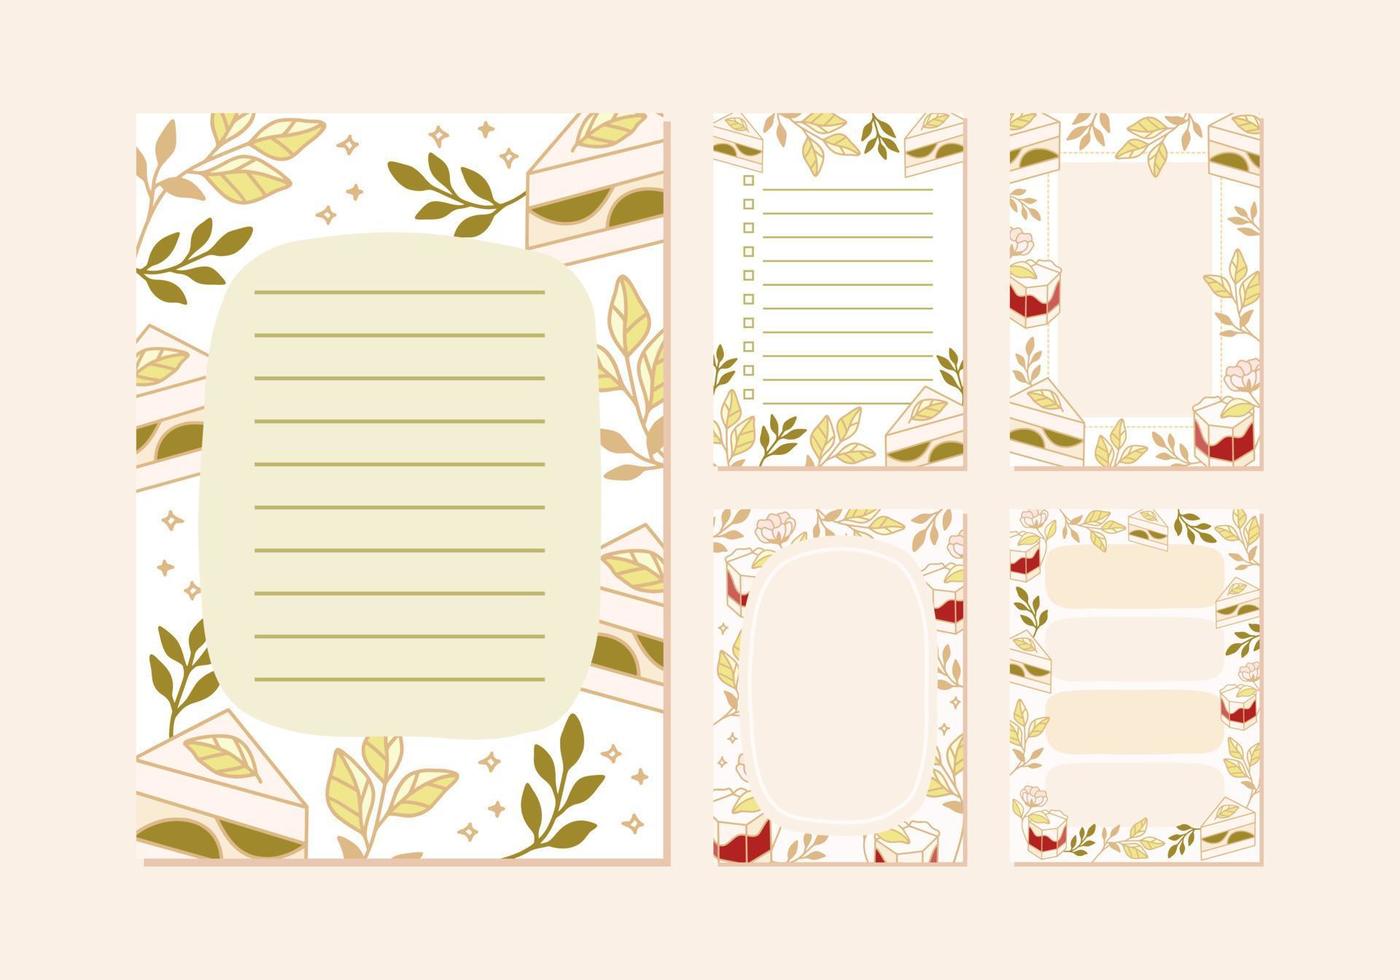 Collection of daily or weekly planner, note paper, to do list, wishlist, organizer templates decorated with cute strawberry cake illustrations vector